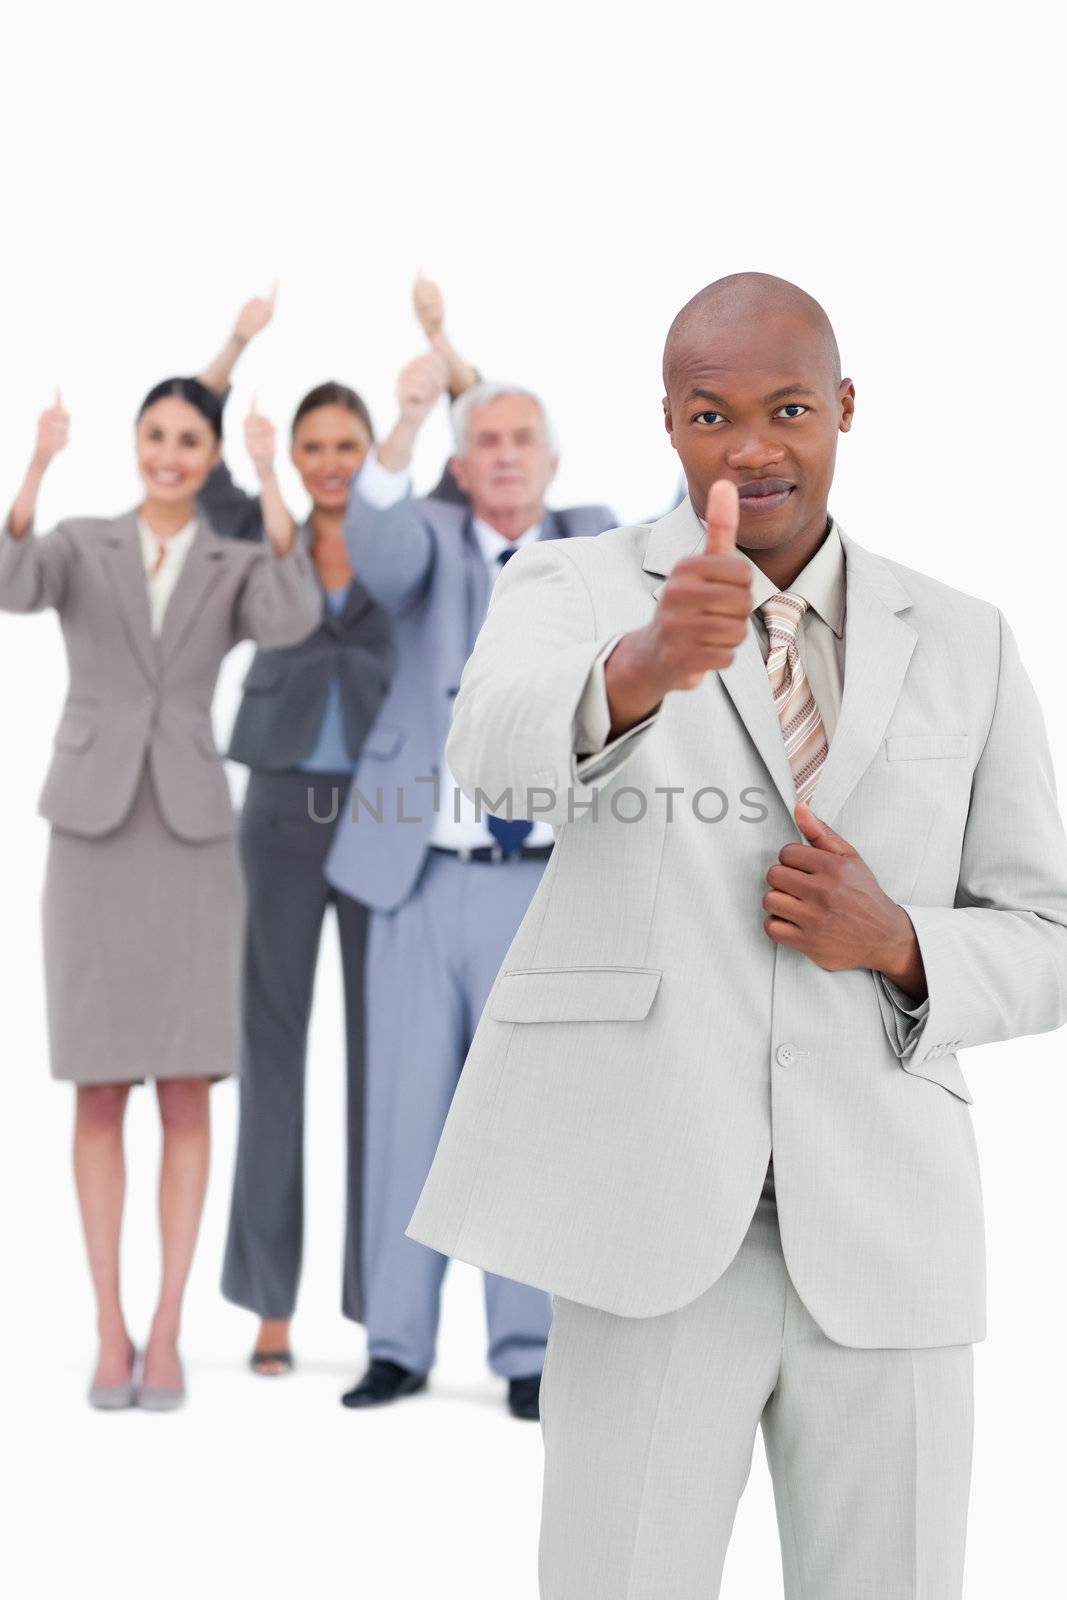 Tradesman with team behind him giving thumb up against a white background